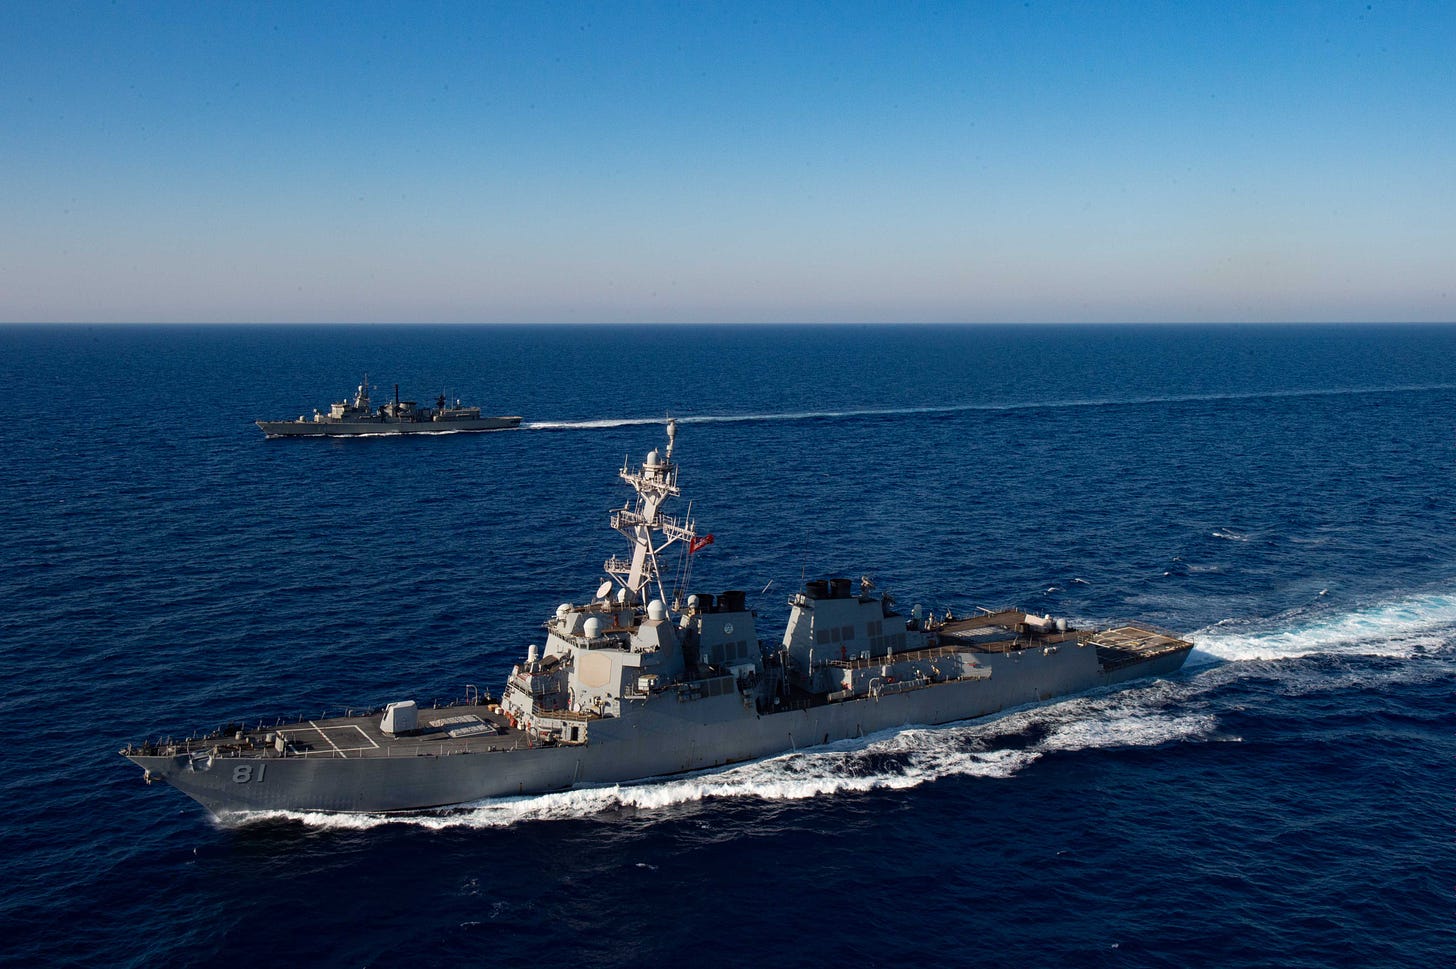 The Arleigh Burke-class guided-missile destroyer USS Winston S. Churchill (DDG 81) executes maneuvering drills with Hellenic Navy frigate Aegean (F 460) in the Mediterranean Sea.